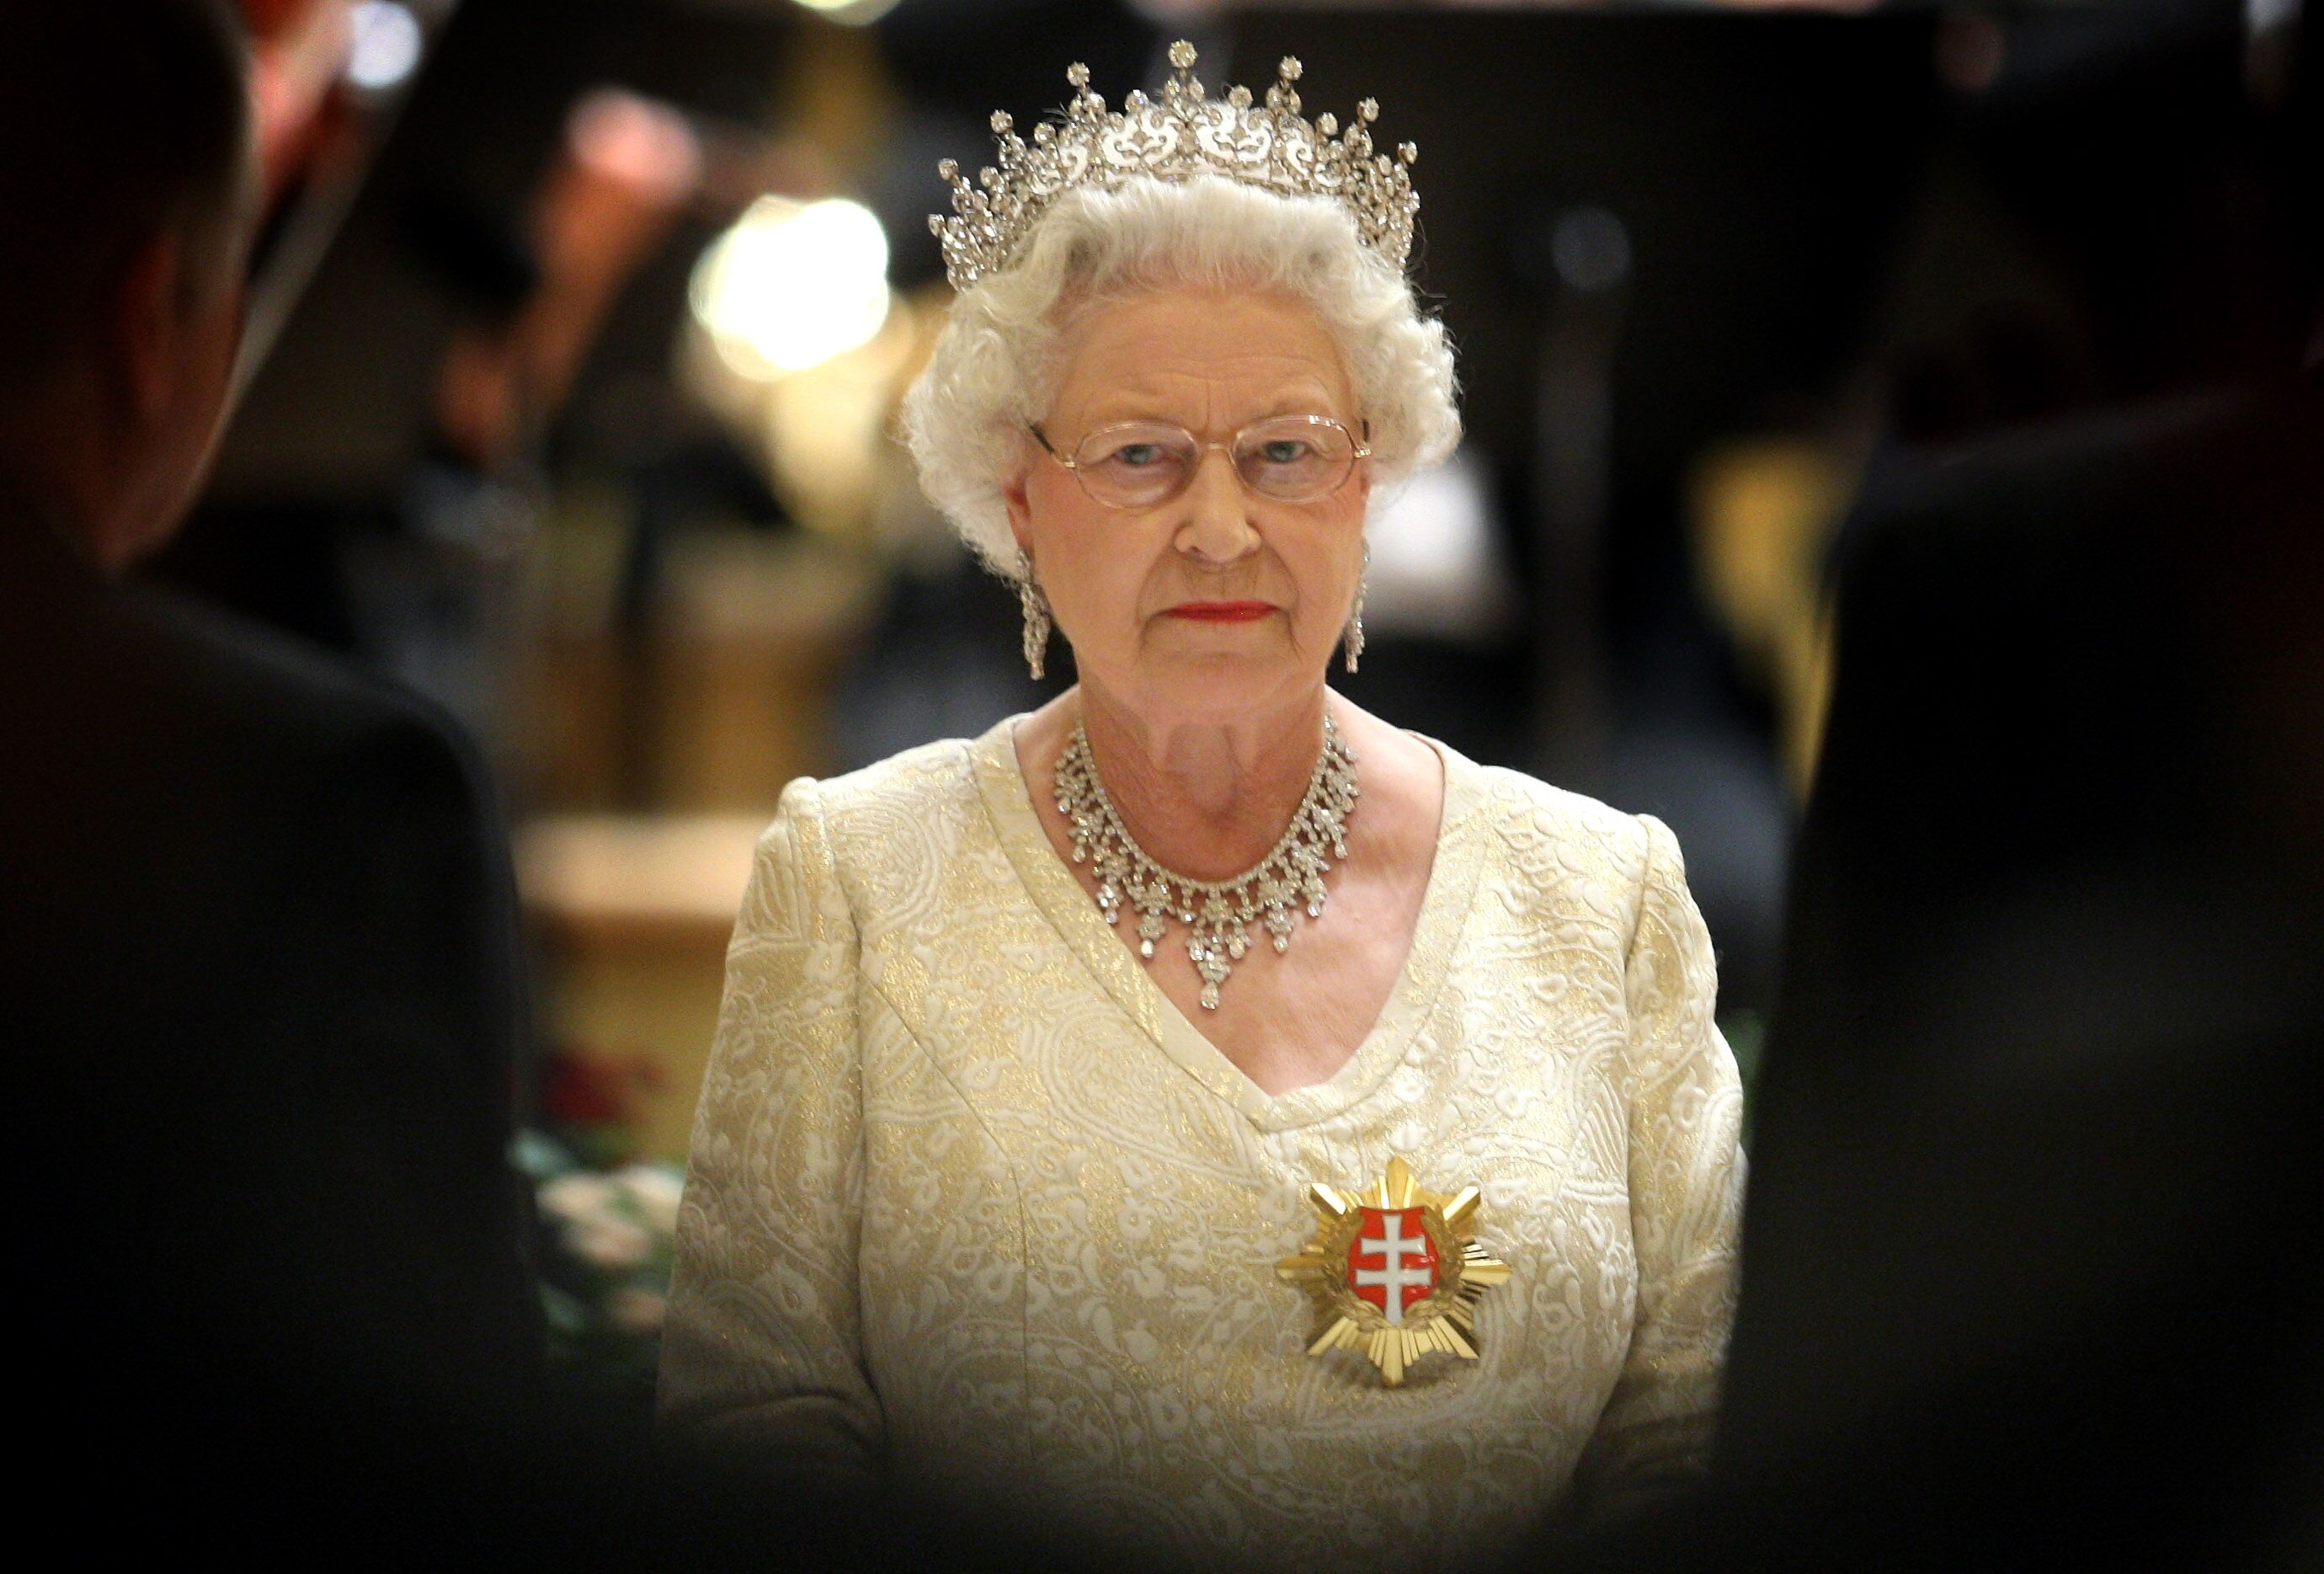  HRH Queen Elizabeth II attends a State Banquet at the Philharmonic Hall on the first day of a tour of Slovakia on October 23, 2008 in Bratislava, Slovakia | Photo: Getty Images